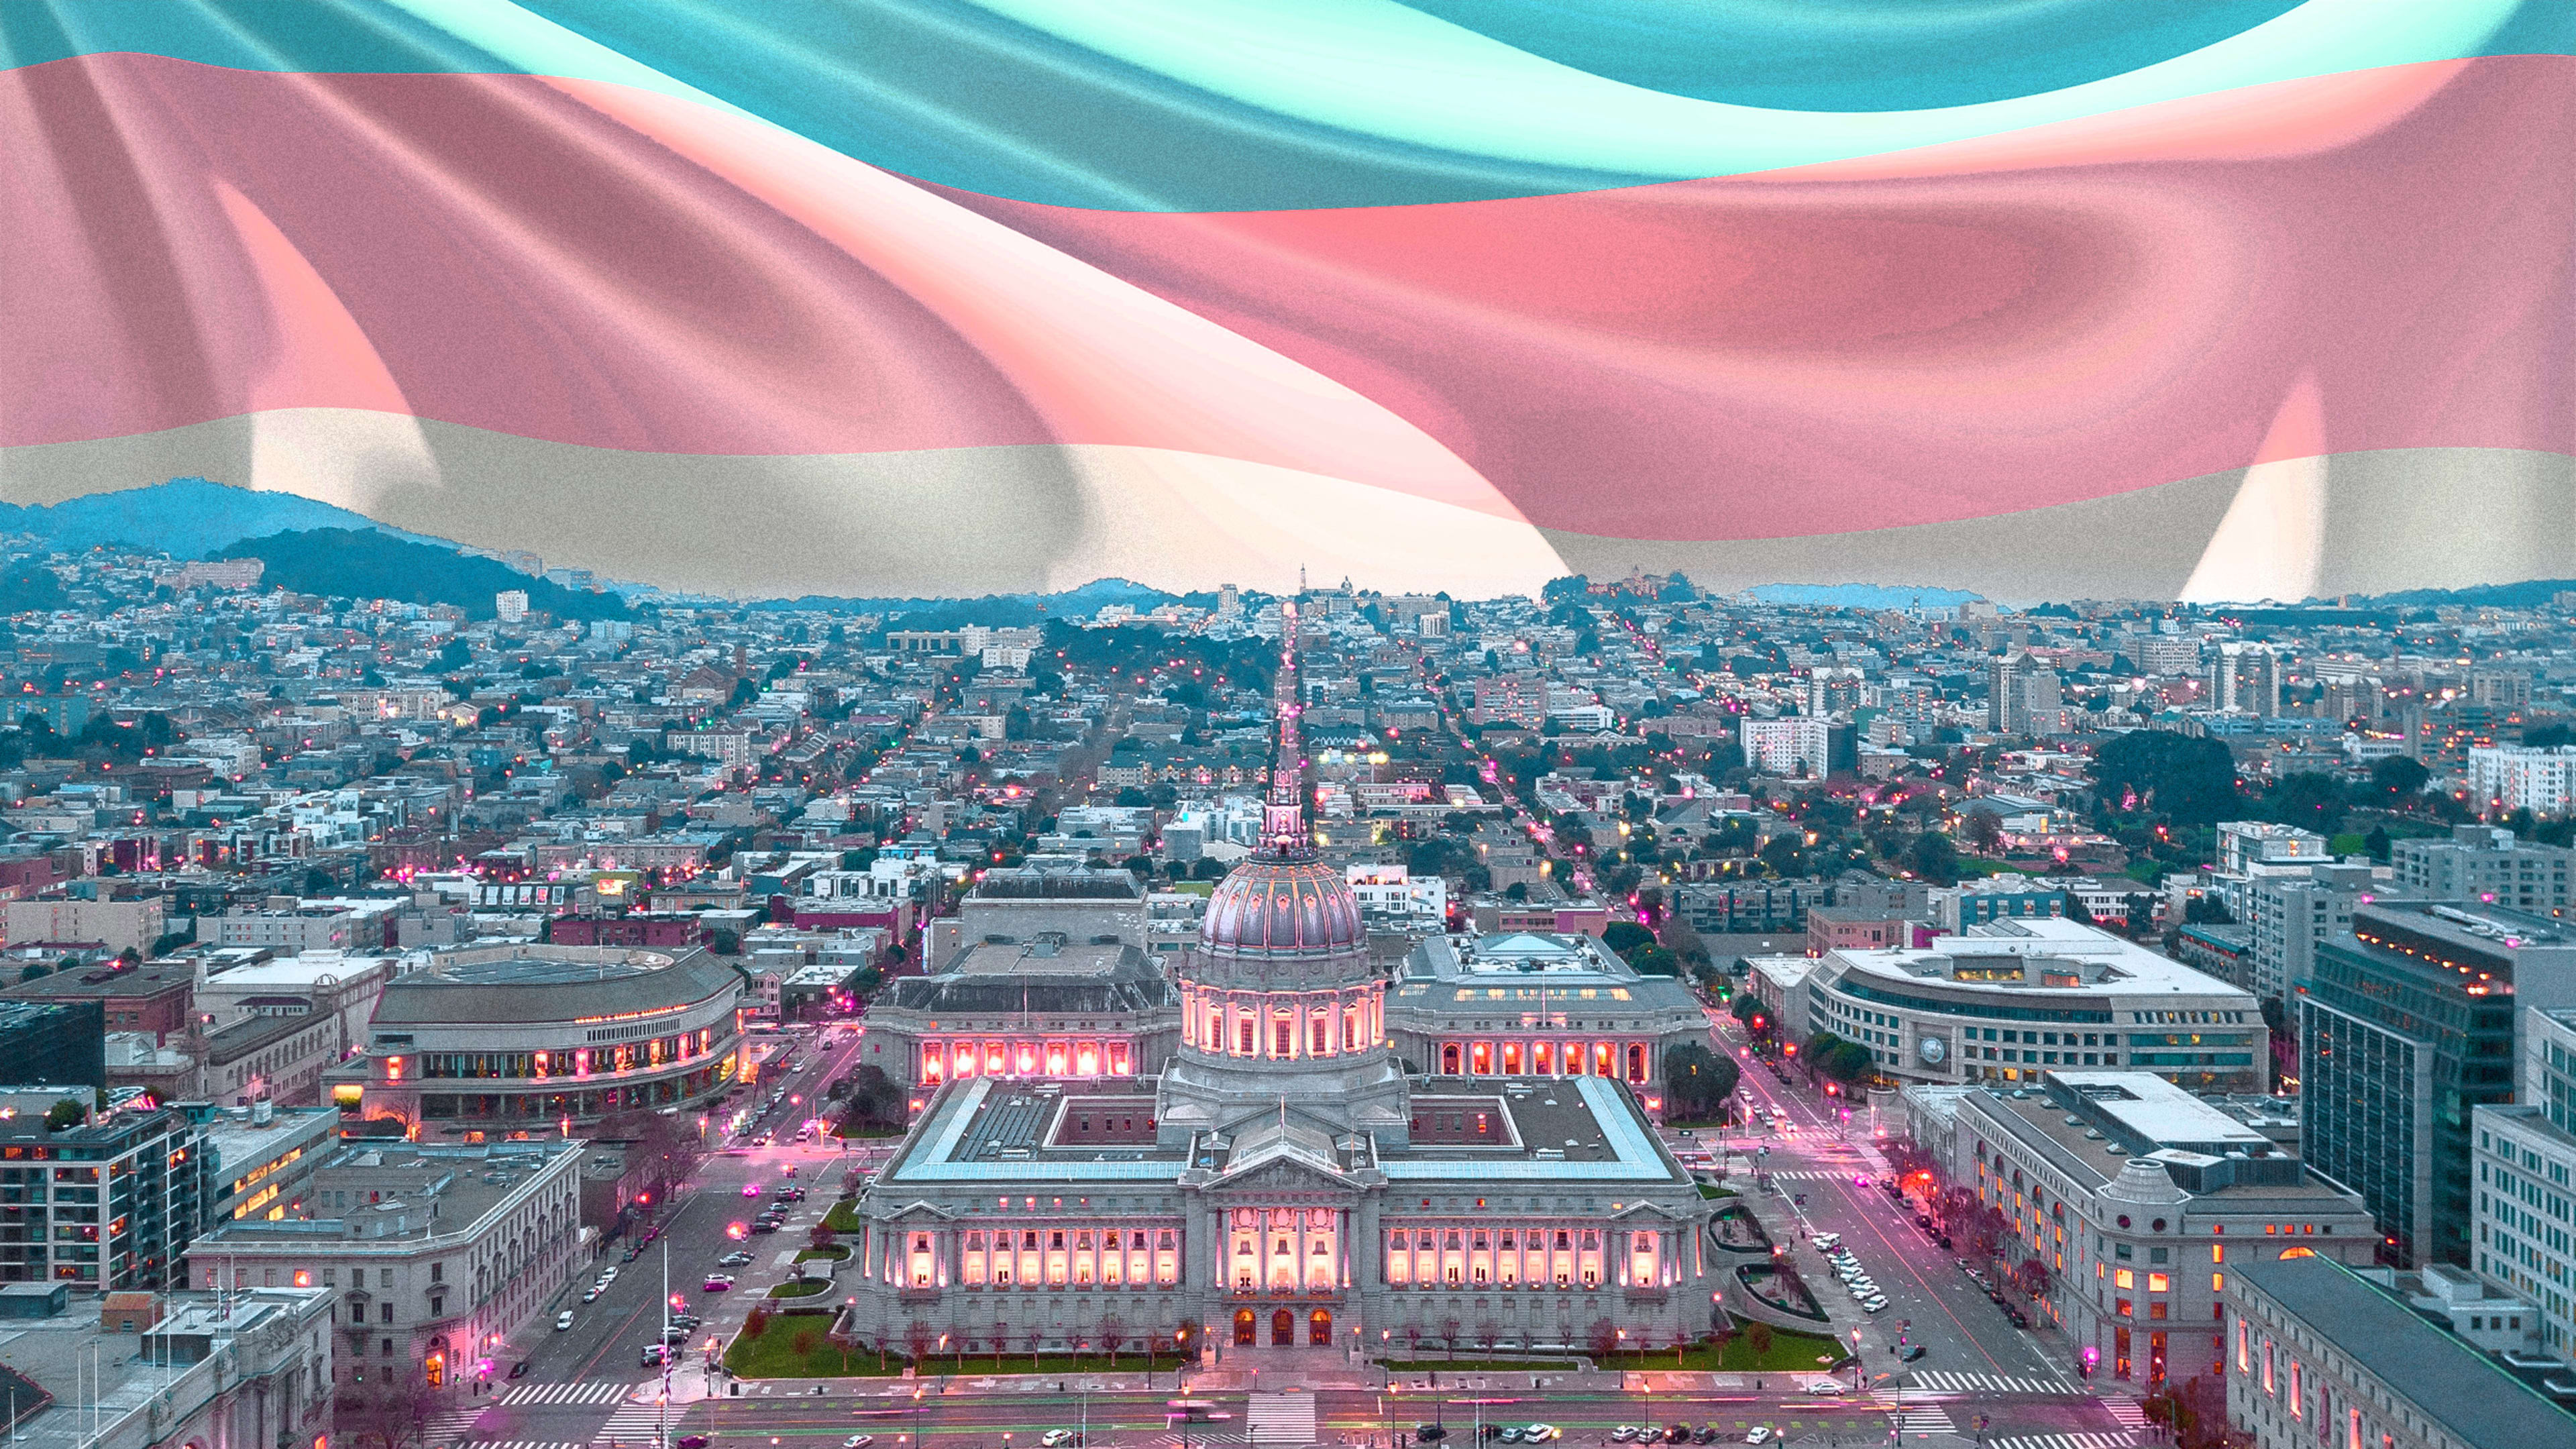 San Francisco launches guaranteed income program specifically for trans people